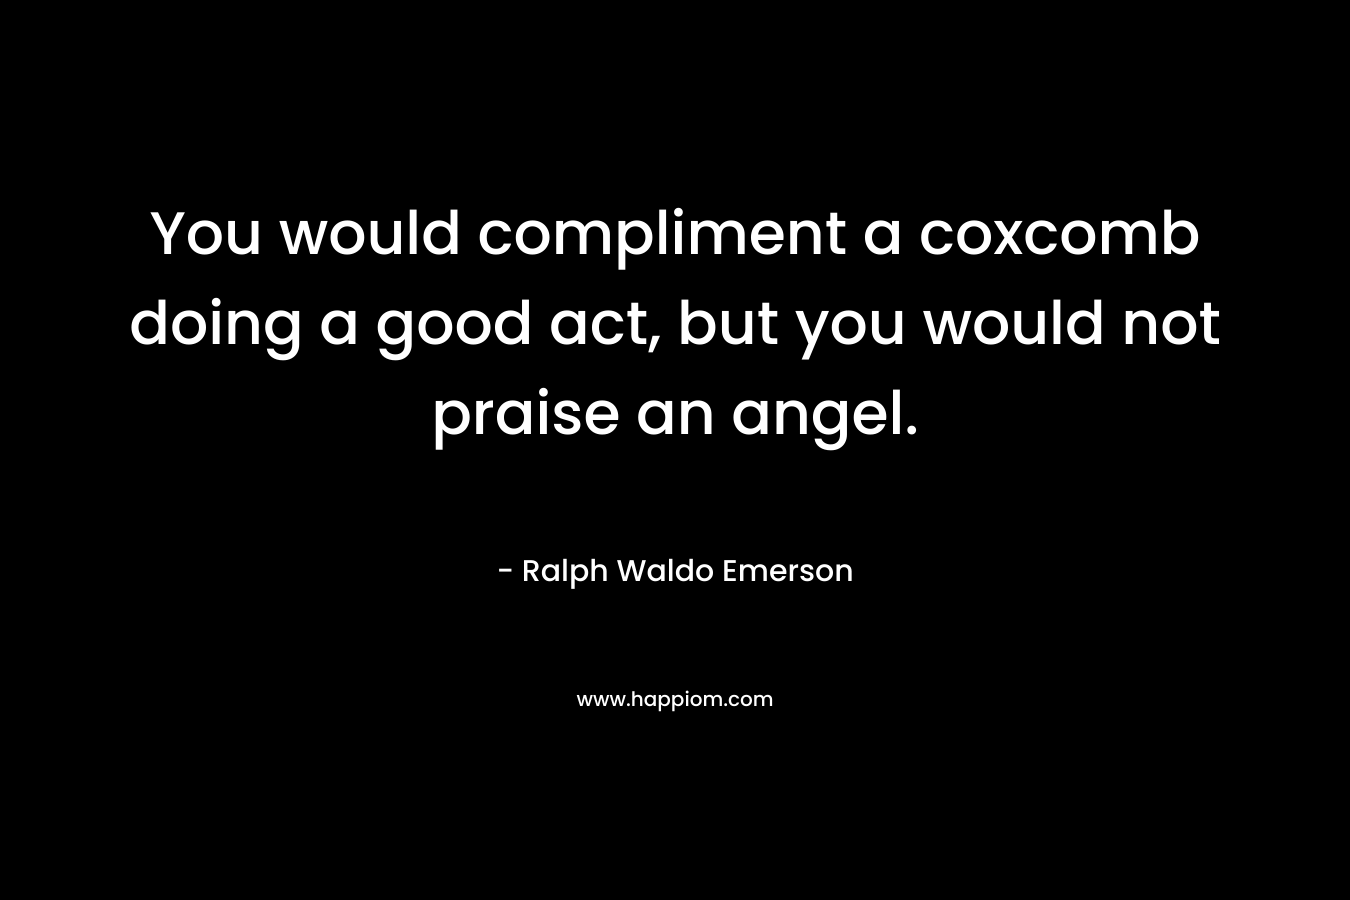 You would compliment a coxcomb doing a good act, but you would not praise an angel. – Ralph Waldo Emerson